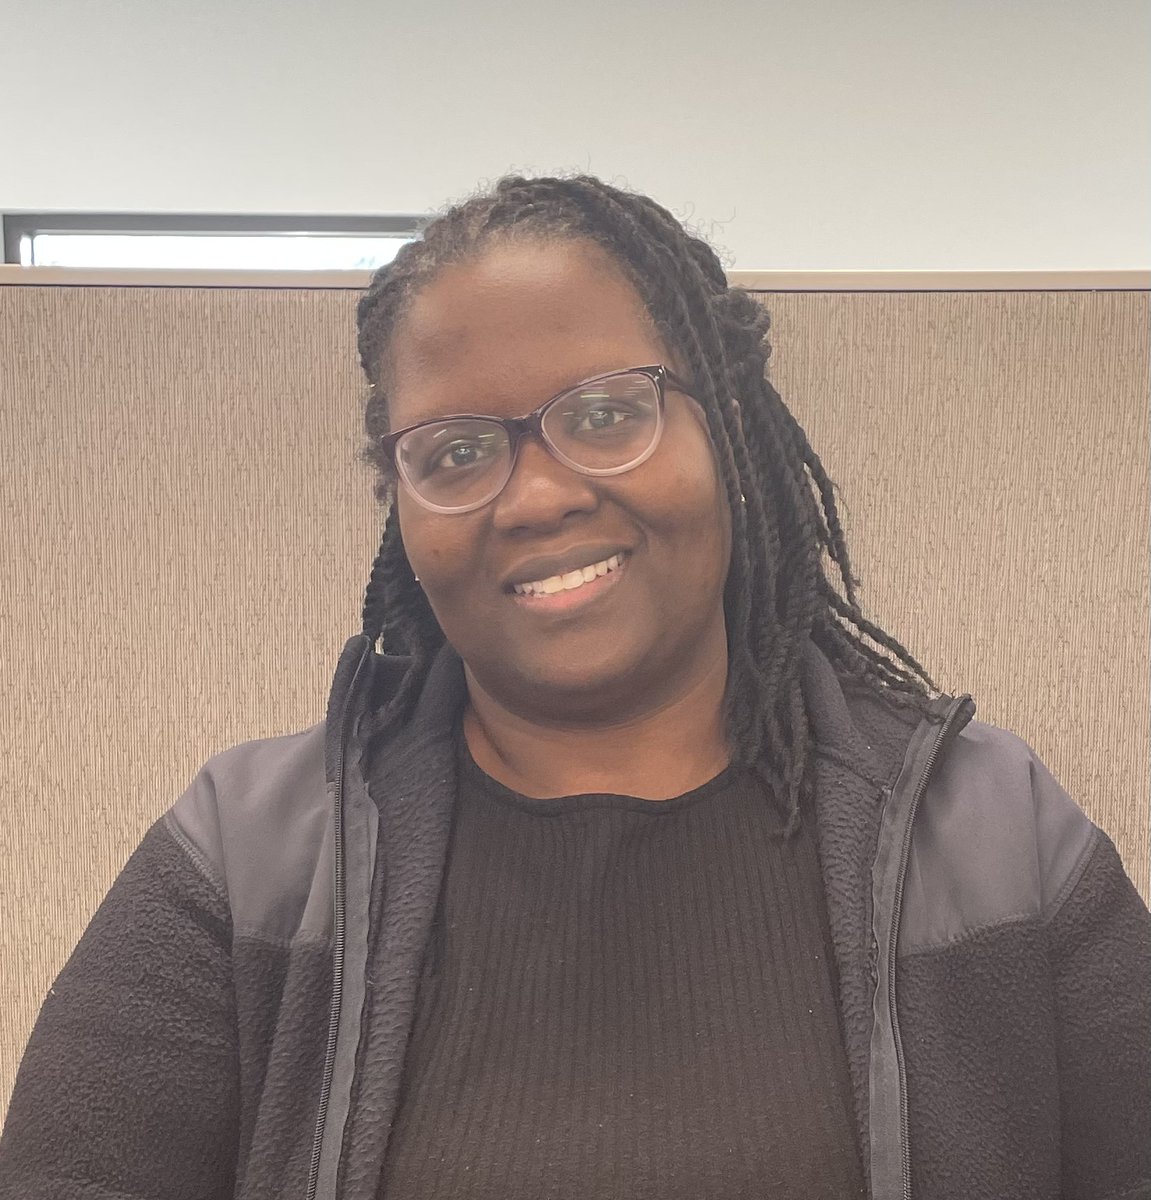 We would like to announce Tyiesha Crawford as Orangeburg County's DSS Employee of the Month for February. Thank you Tyiesha for the work you're doing to serve our clients.
#DSSserves2024
#ThisIsWhyWeWork
#StrengtheningFamilies